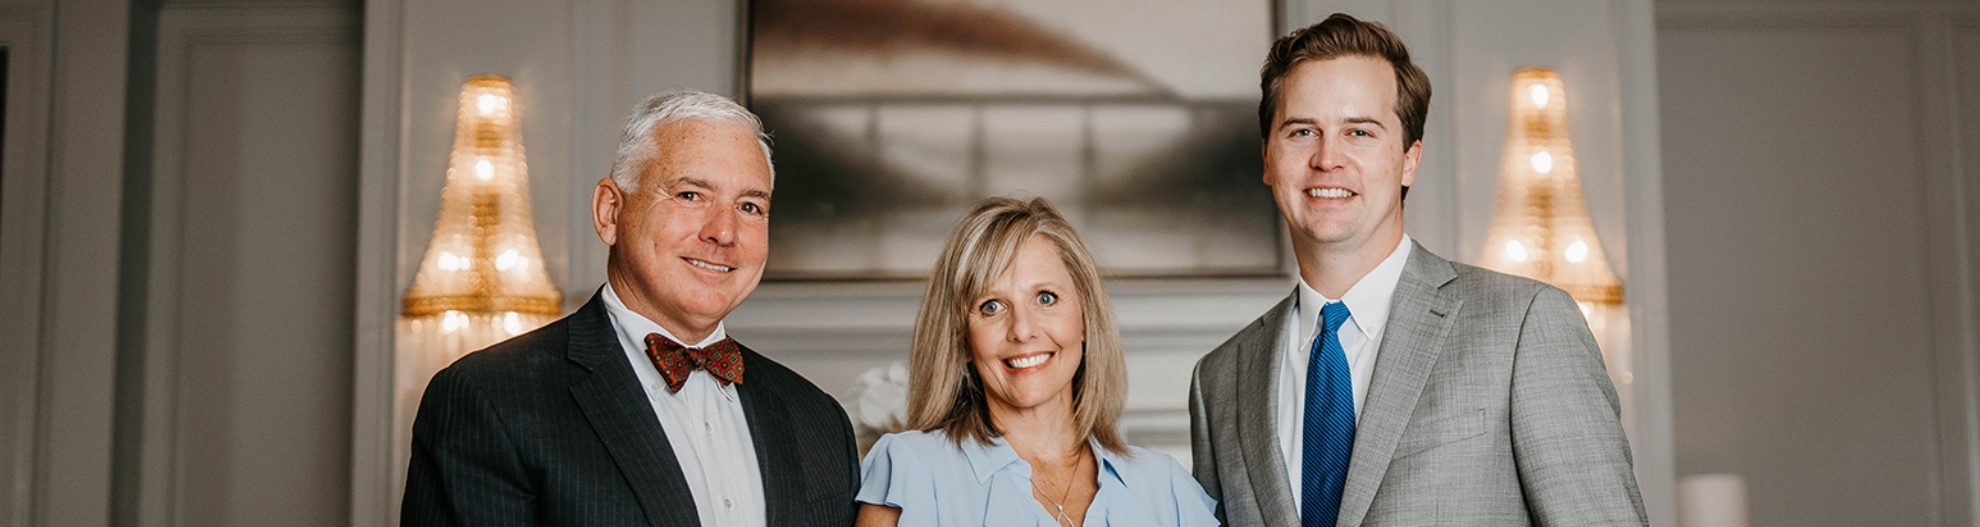 From left to right: Bill Wade, Branch Manager, Senior Vice President/Investments. Stacie Wegman, Client Relationship Manager, Reid Barry, Associate Vice President/Investments